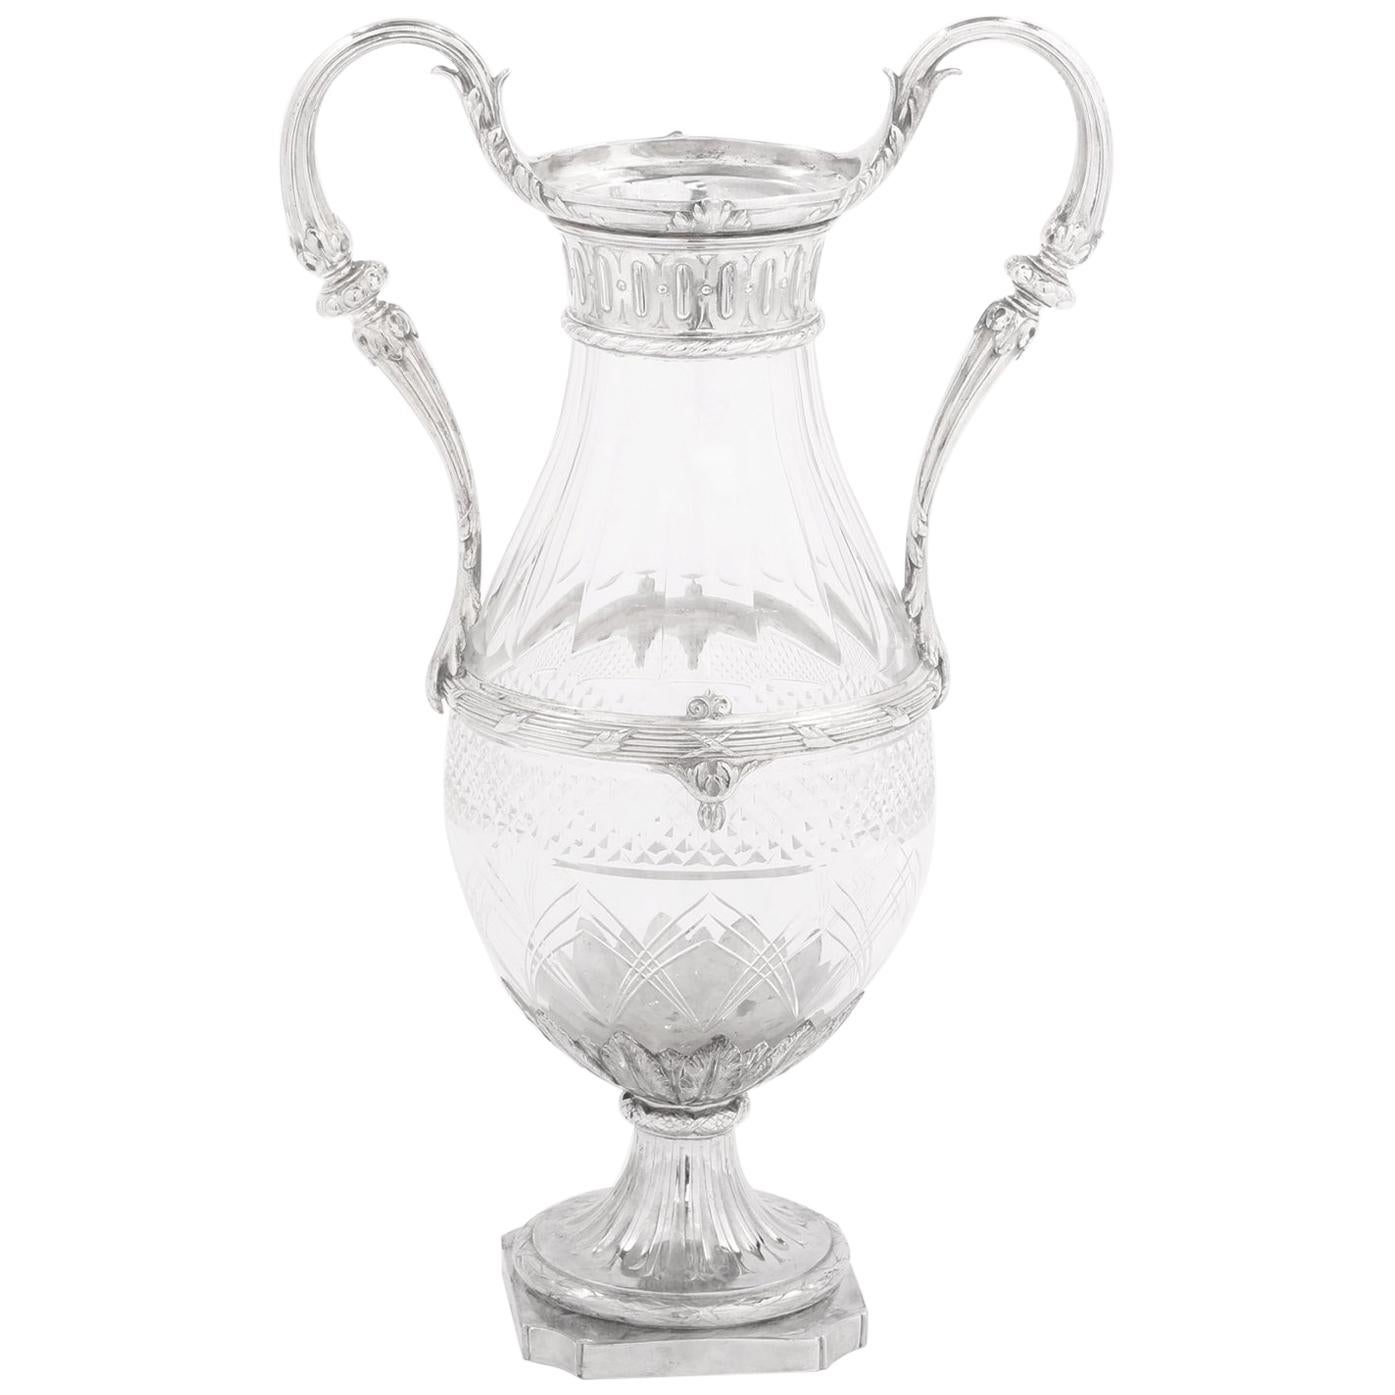 French Silver Mounted / Cut Glass Decorative Vase